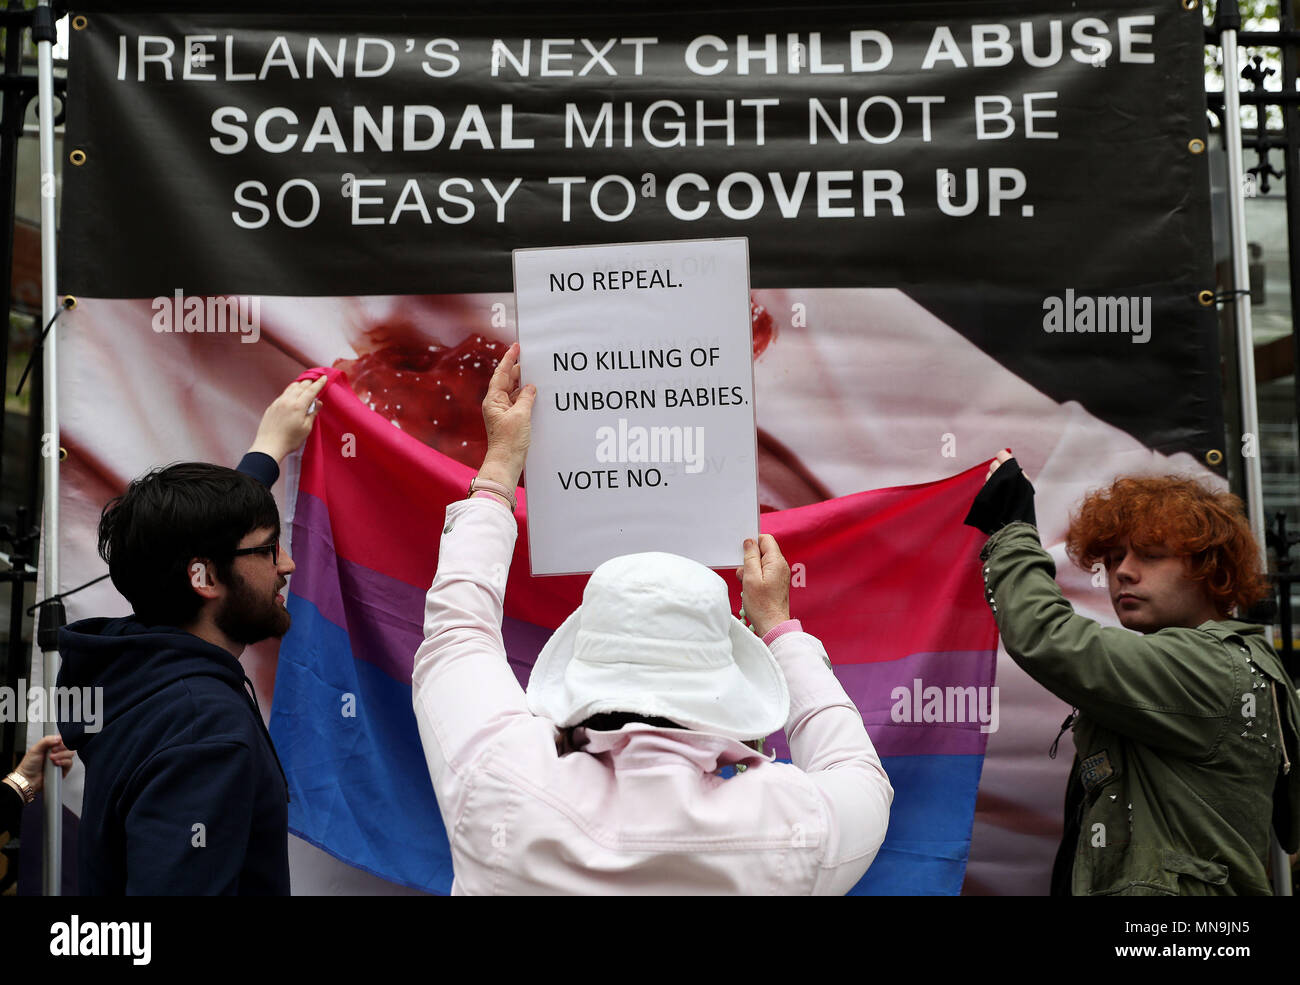 An anti-abortion campaigner holds a sign up as pro-choice campaigners cover anti-abortion banners which contain graphic images outside Leinster House, Dublin, ahead of the referendum on the 8th Amendment of the Irish Constitution on May 25th. Stock Photo